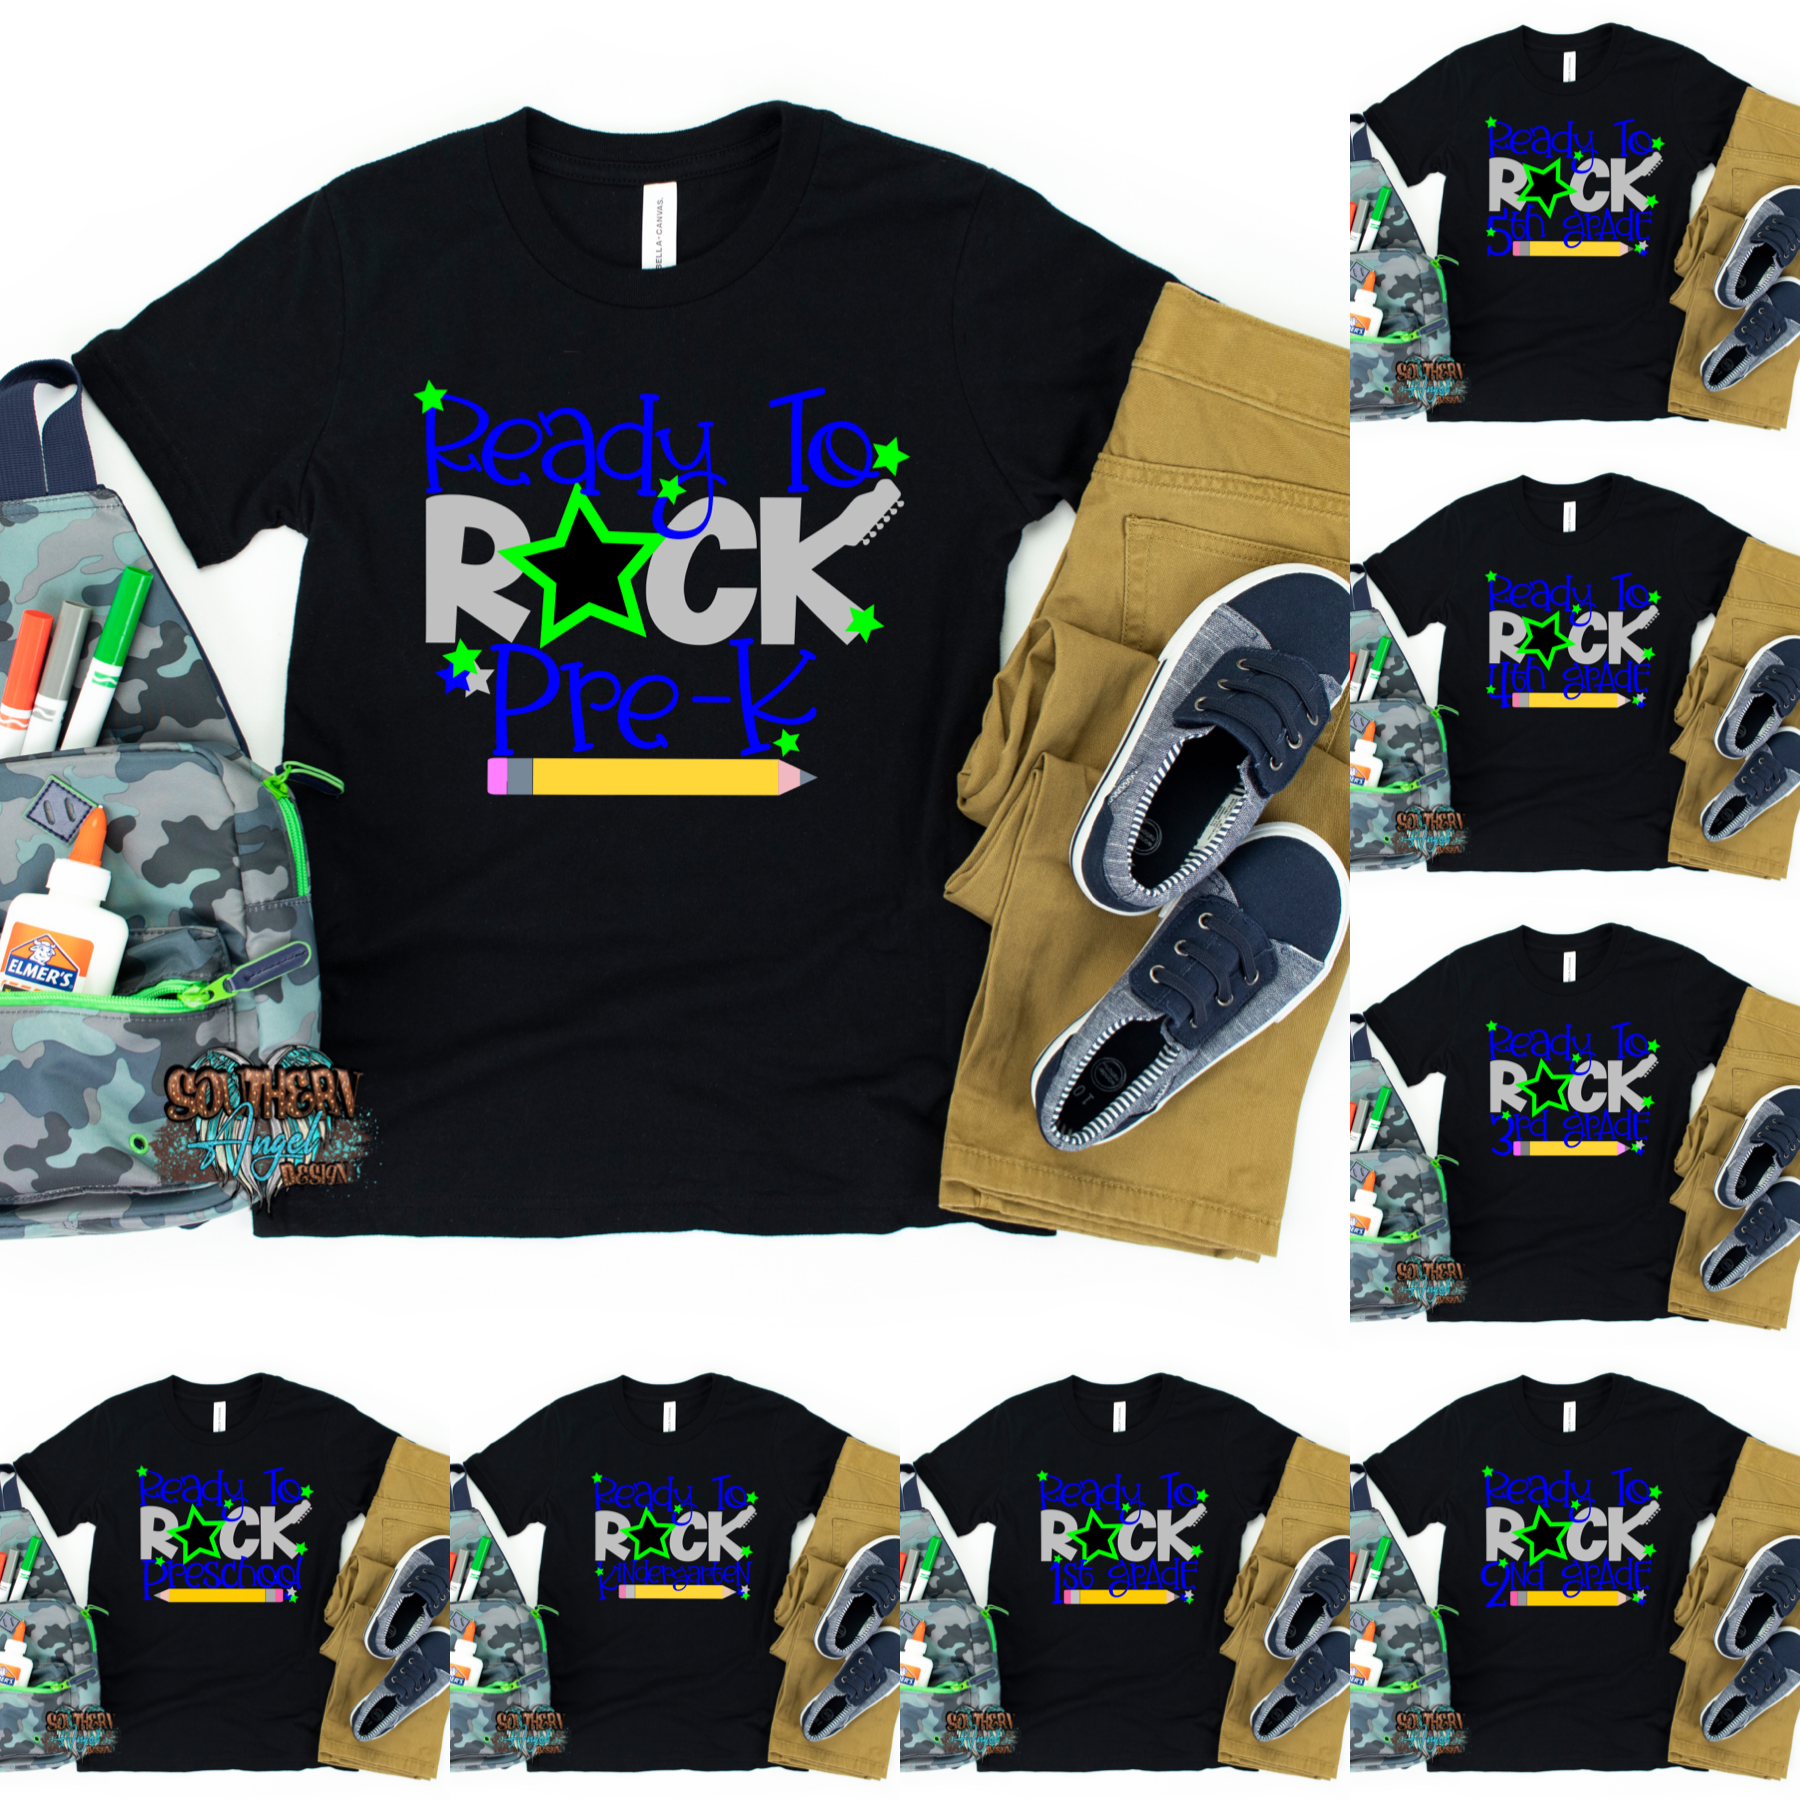 Black Ready To Rock Pre-K image_5ee39aae-5abe-4105-b881-8f18f60097cd.png ready-to-rock Back To School